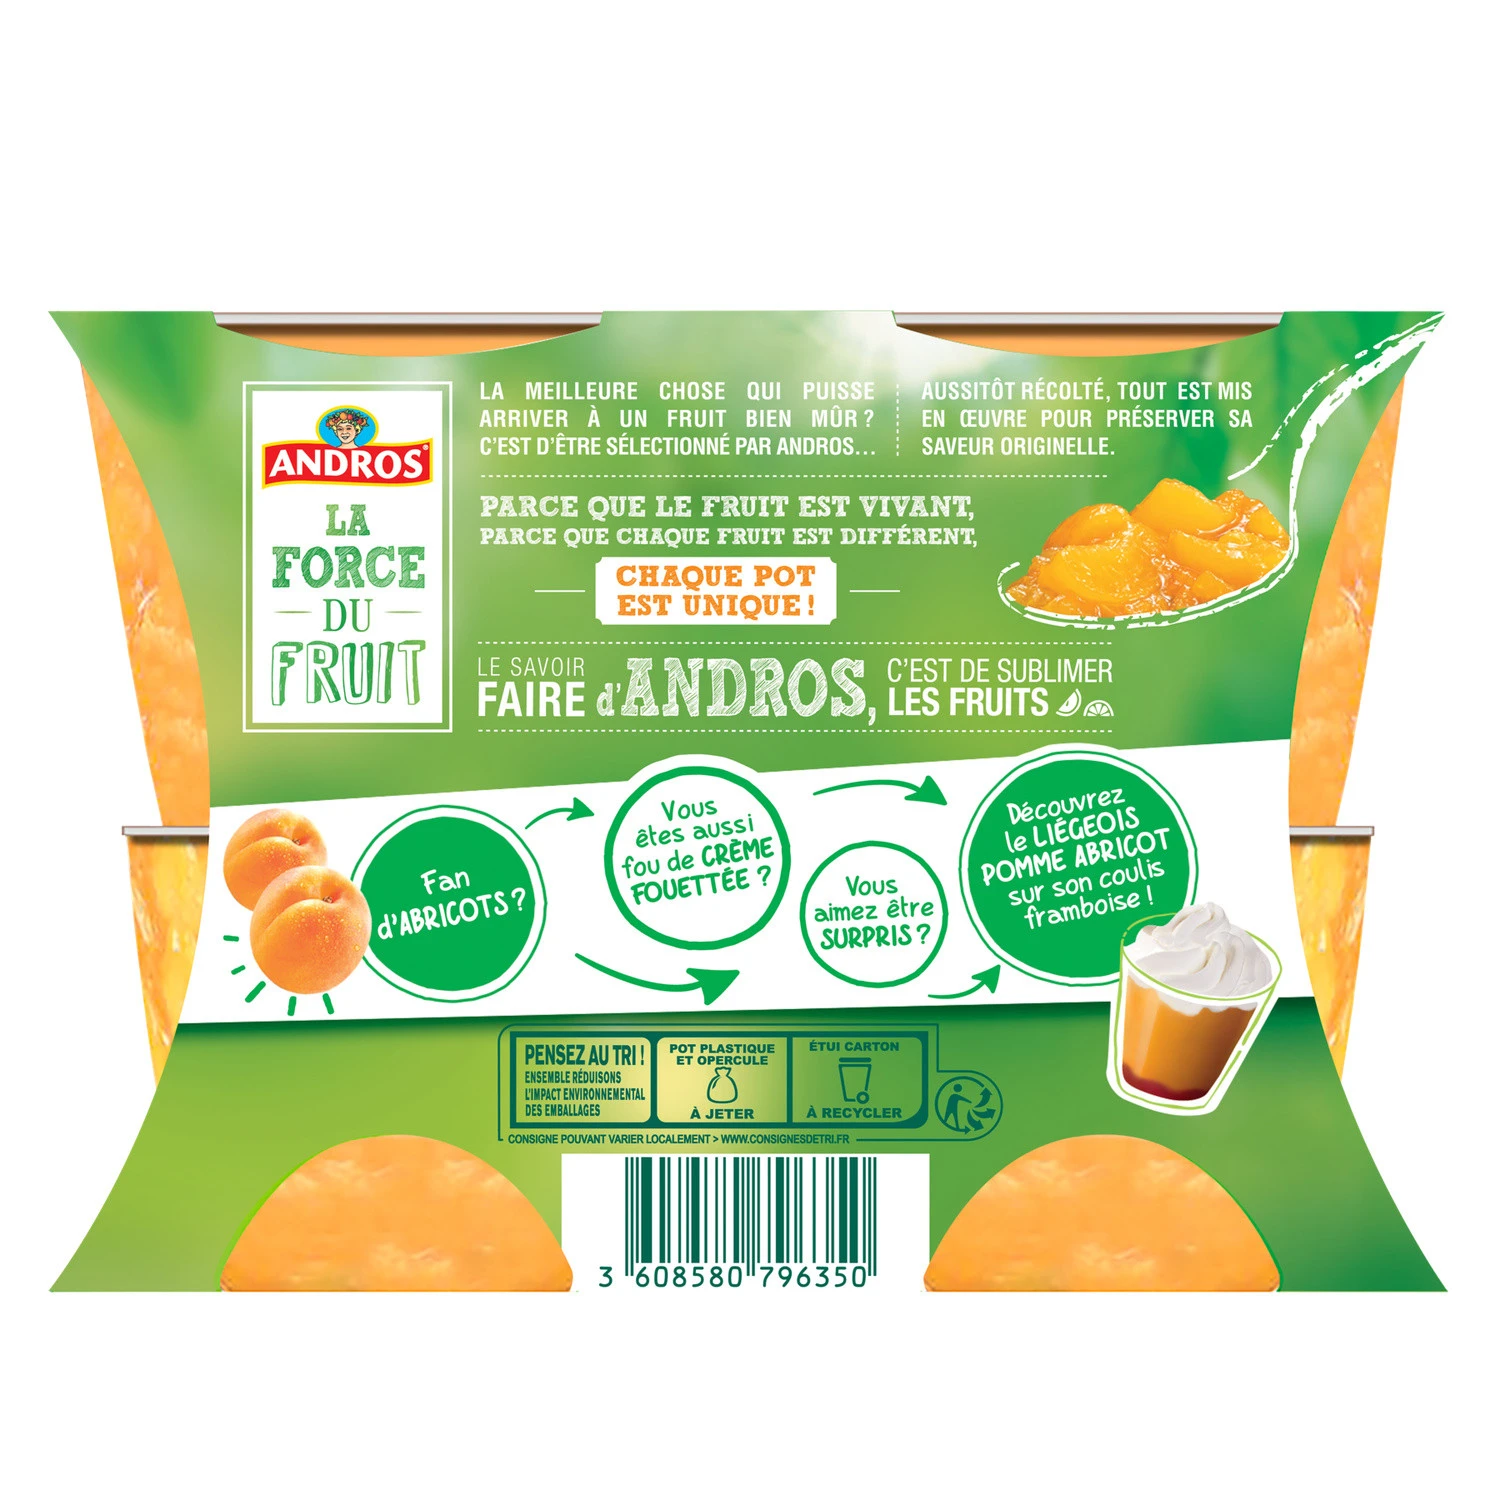 Andros Delice of Apricot dessert 4x100g